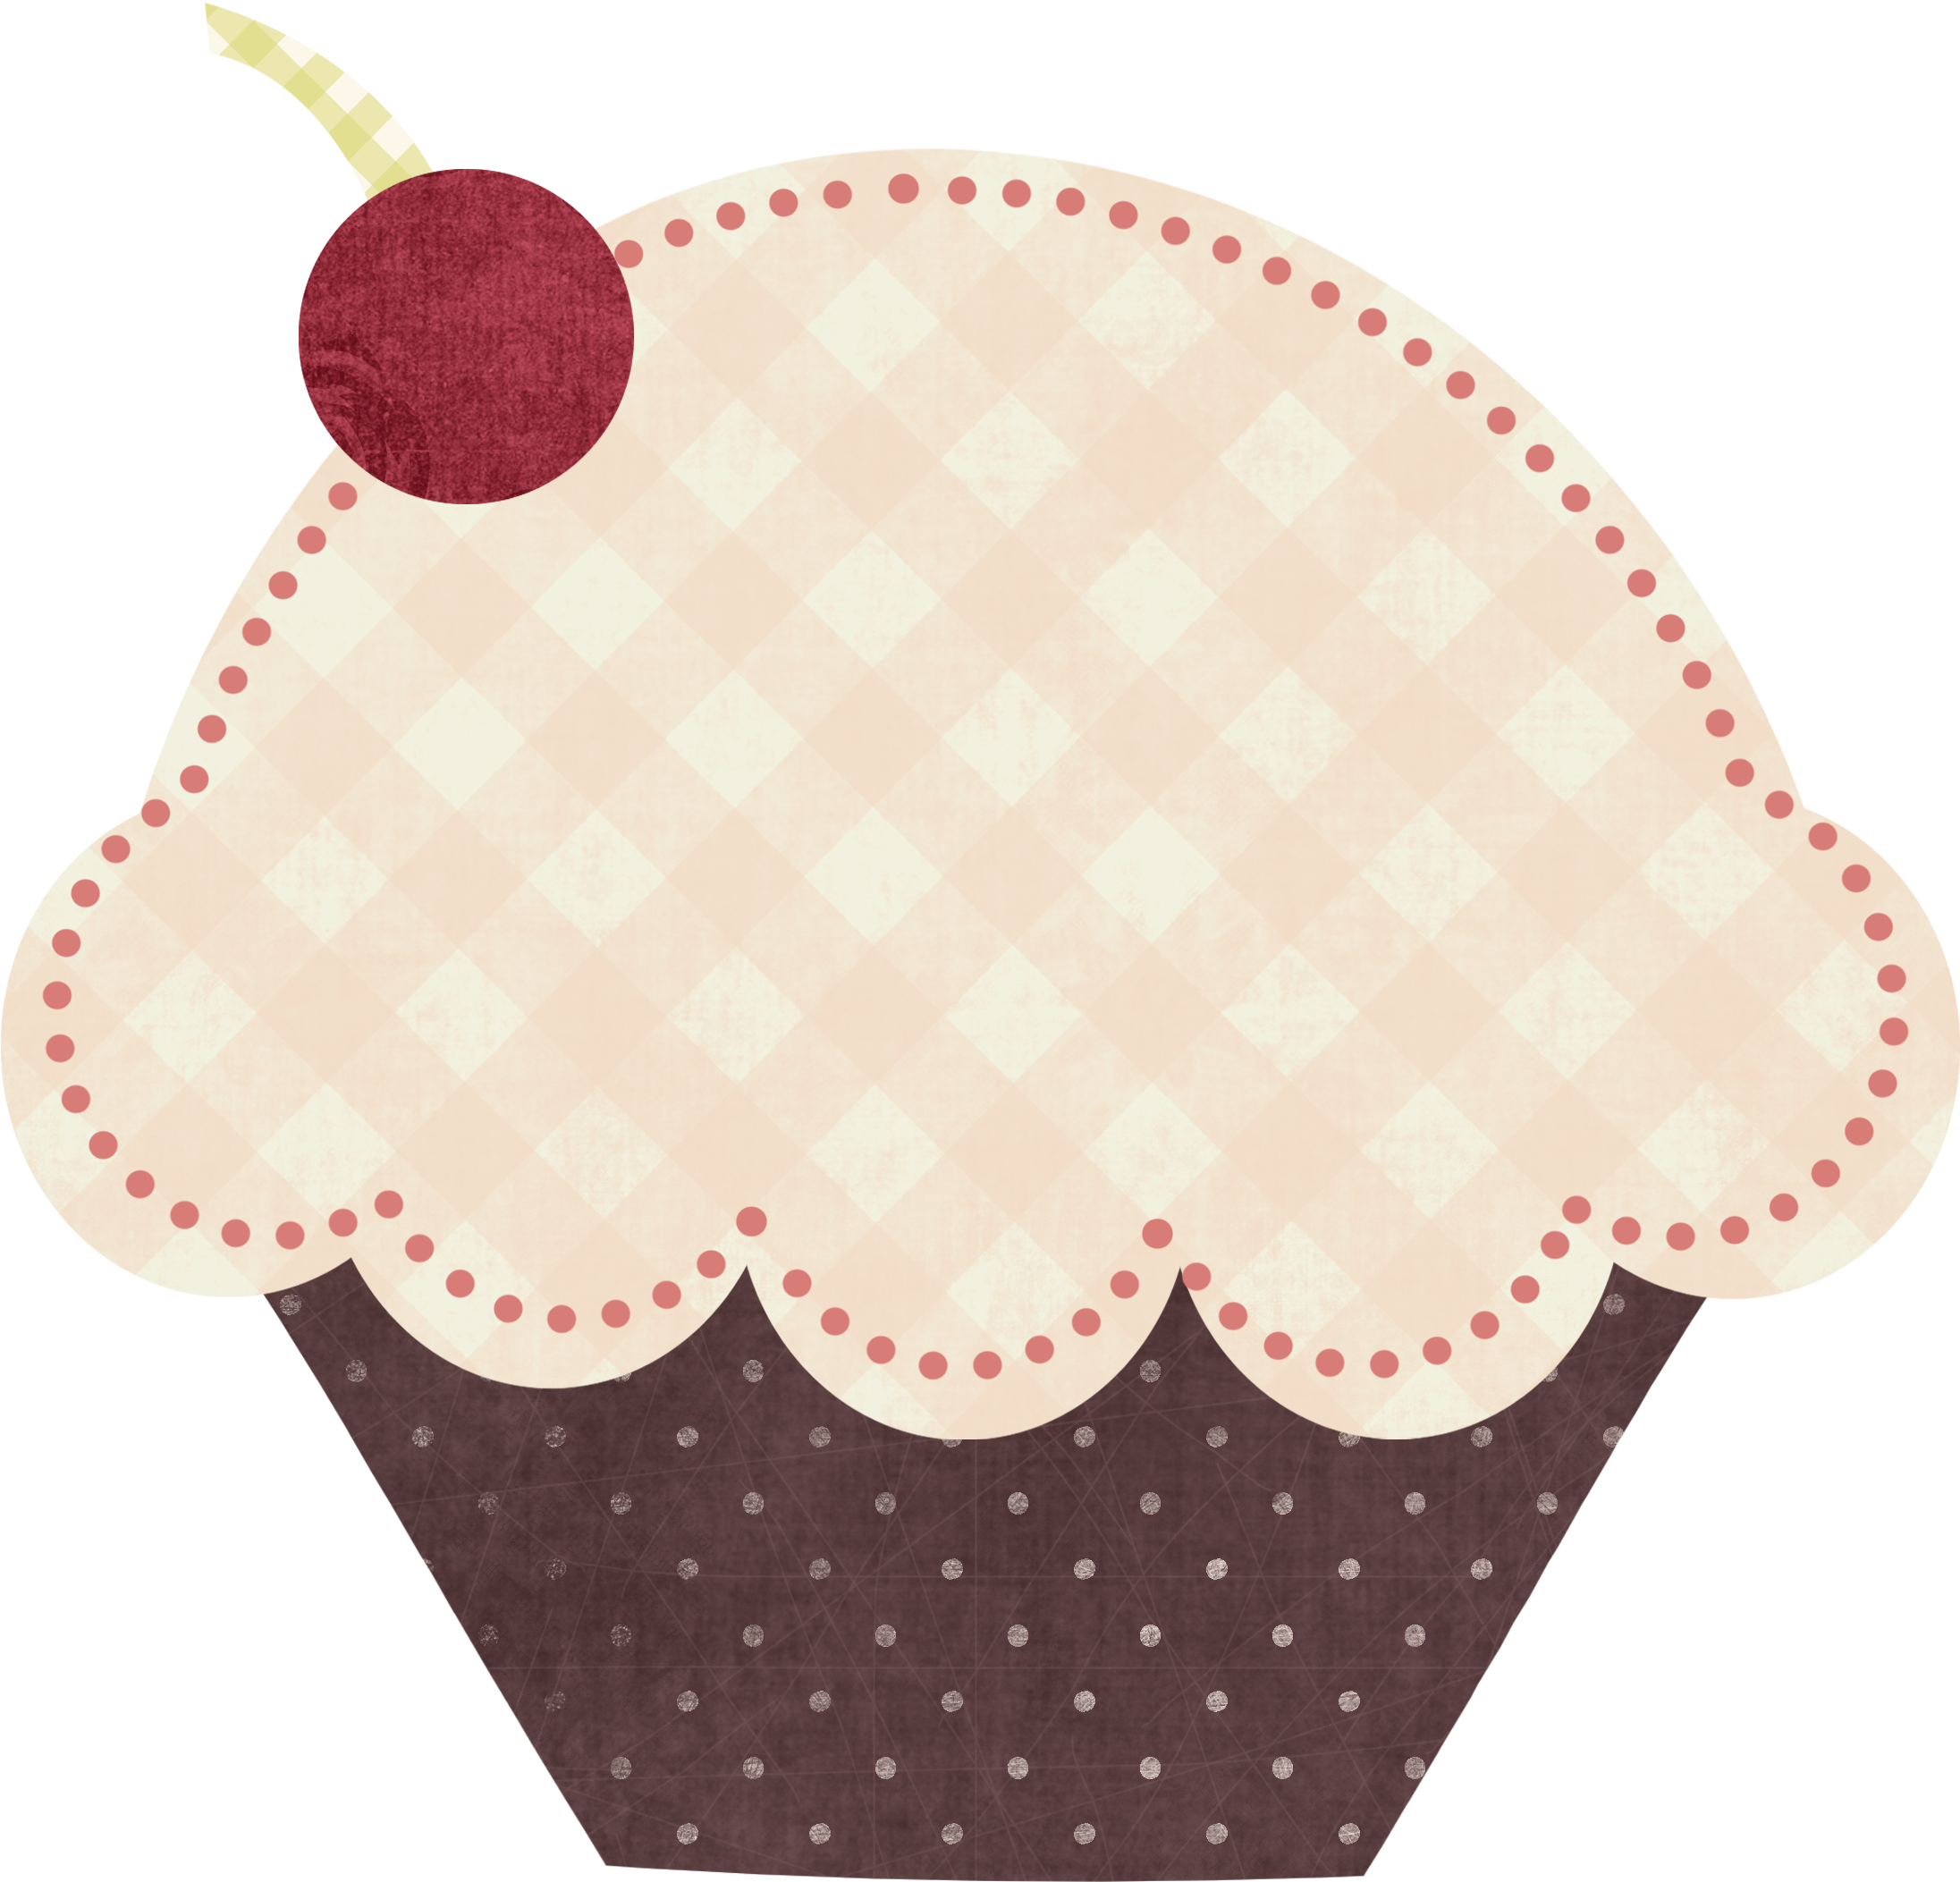 Free Clip Art From The Pumpkins And Posies Blog - Cute Cupcake Designs Photoshop (2500x2500)